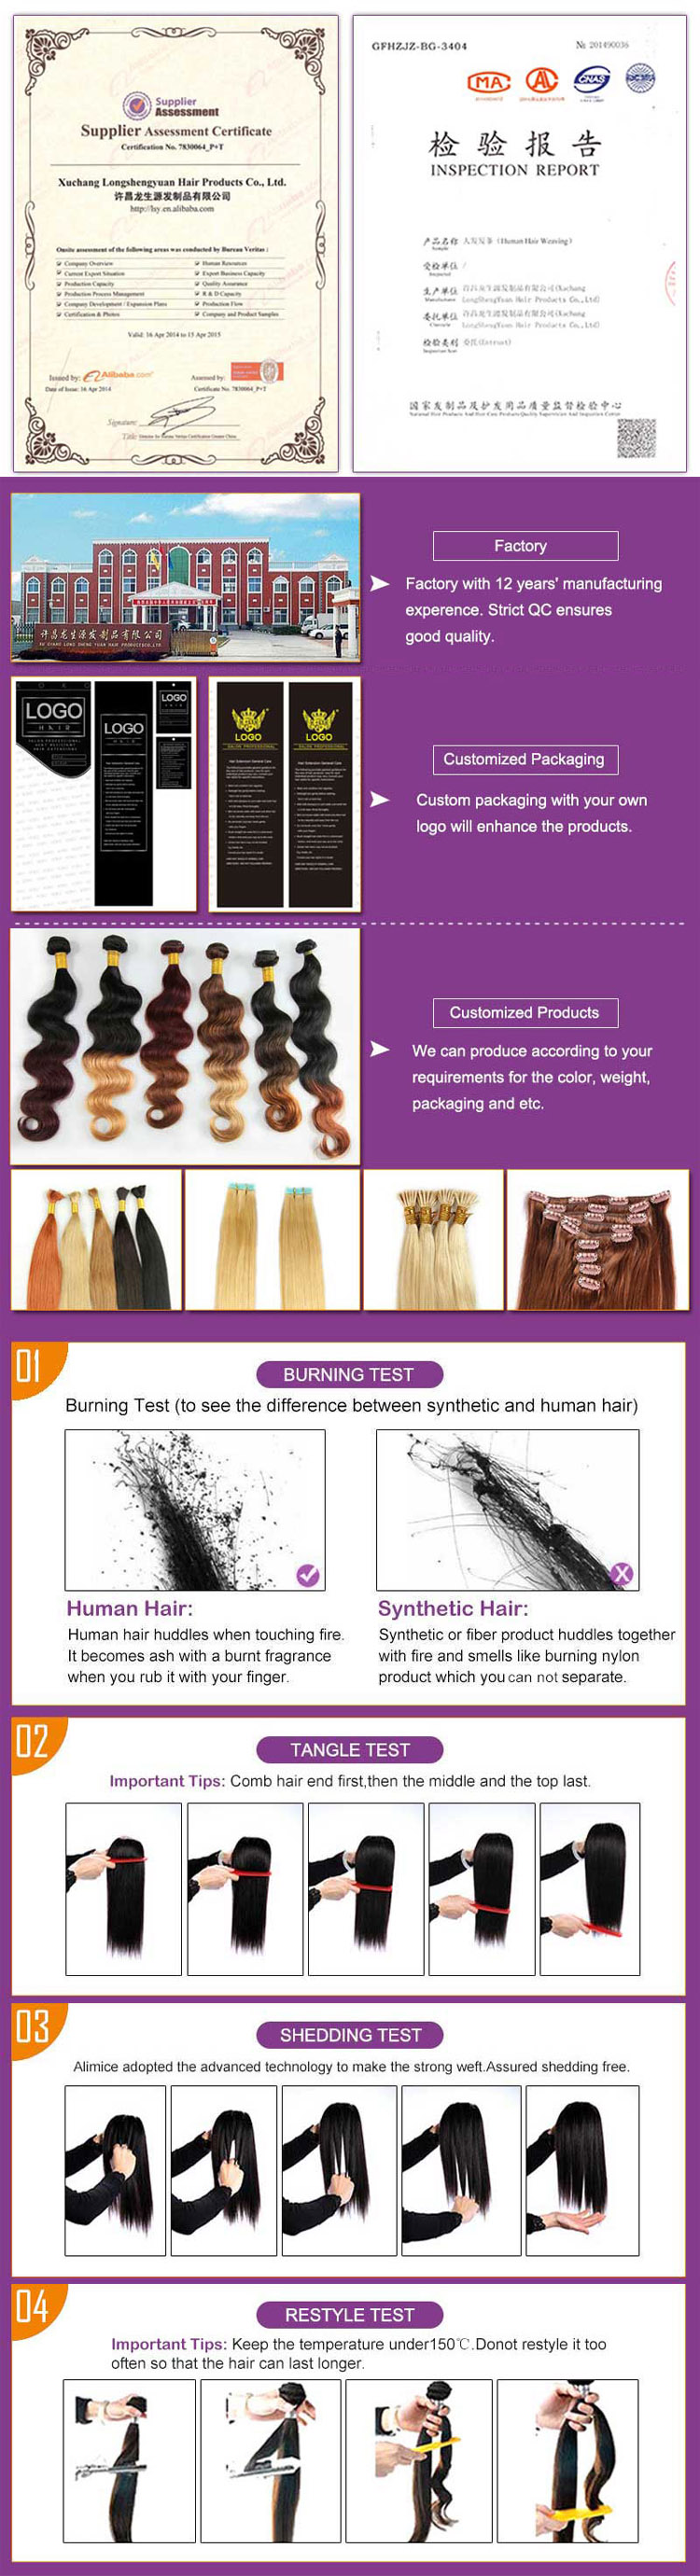 New arrival 100 percent brazilian human hair wigs,water wave full lace wig, virgin remy human hair wig